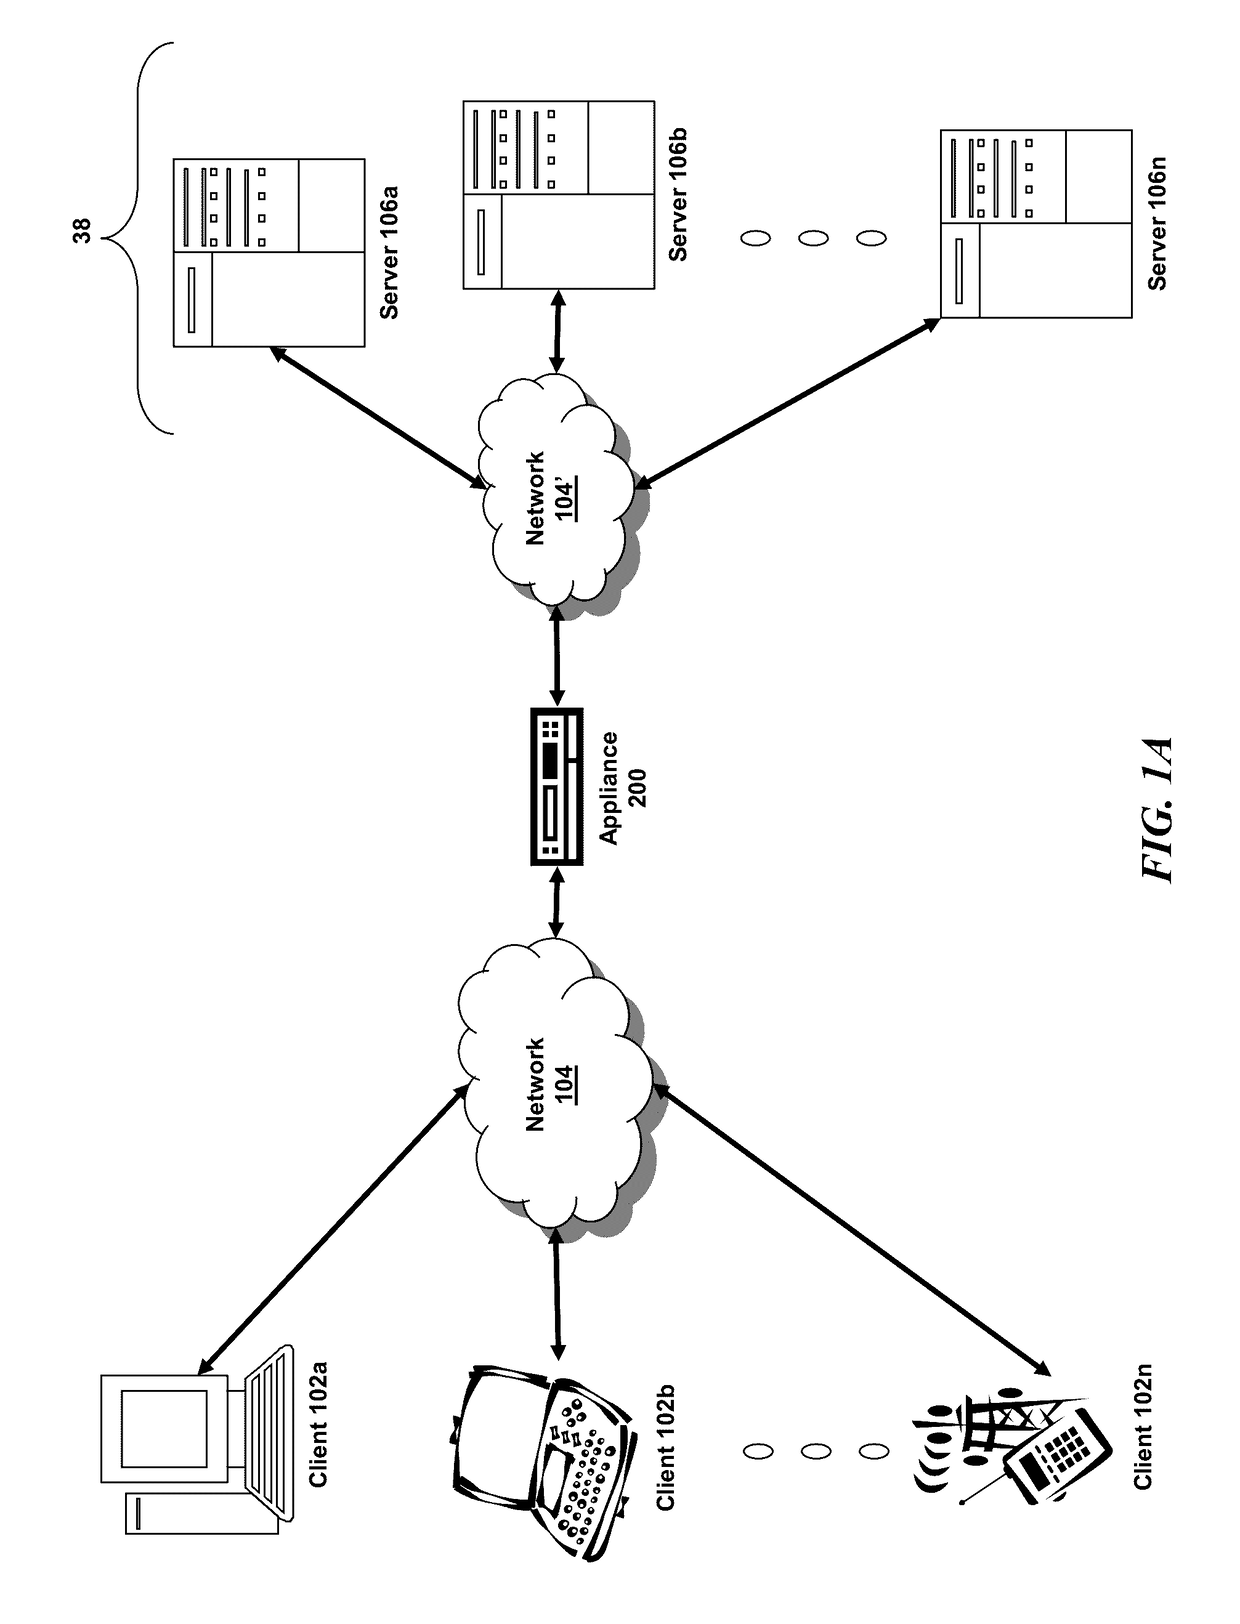 Systems and methods to support vxlan in partition environment where a single system acts as multiple logical systems to support multitenancy